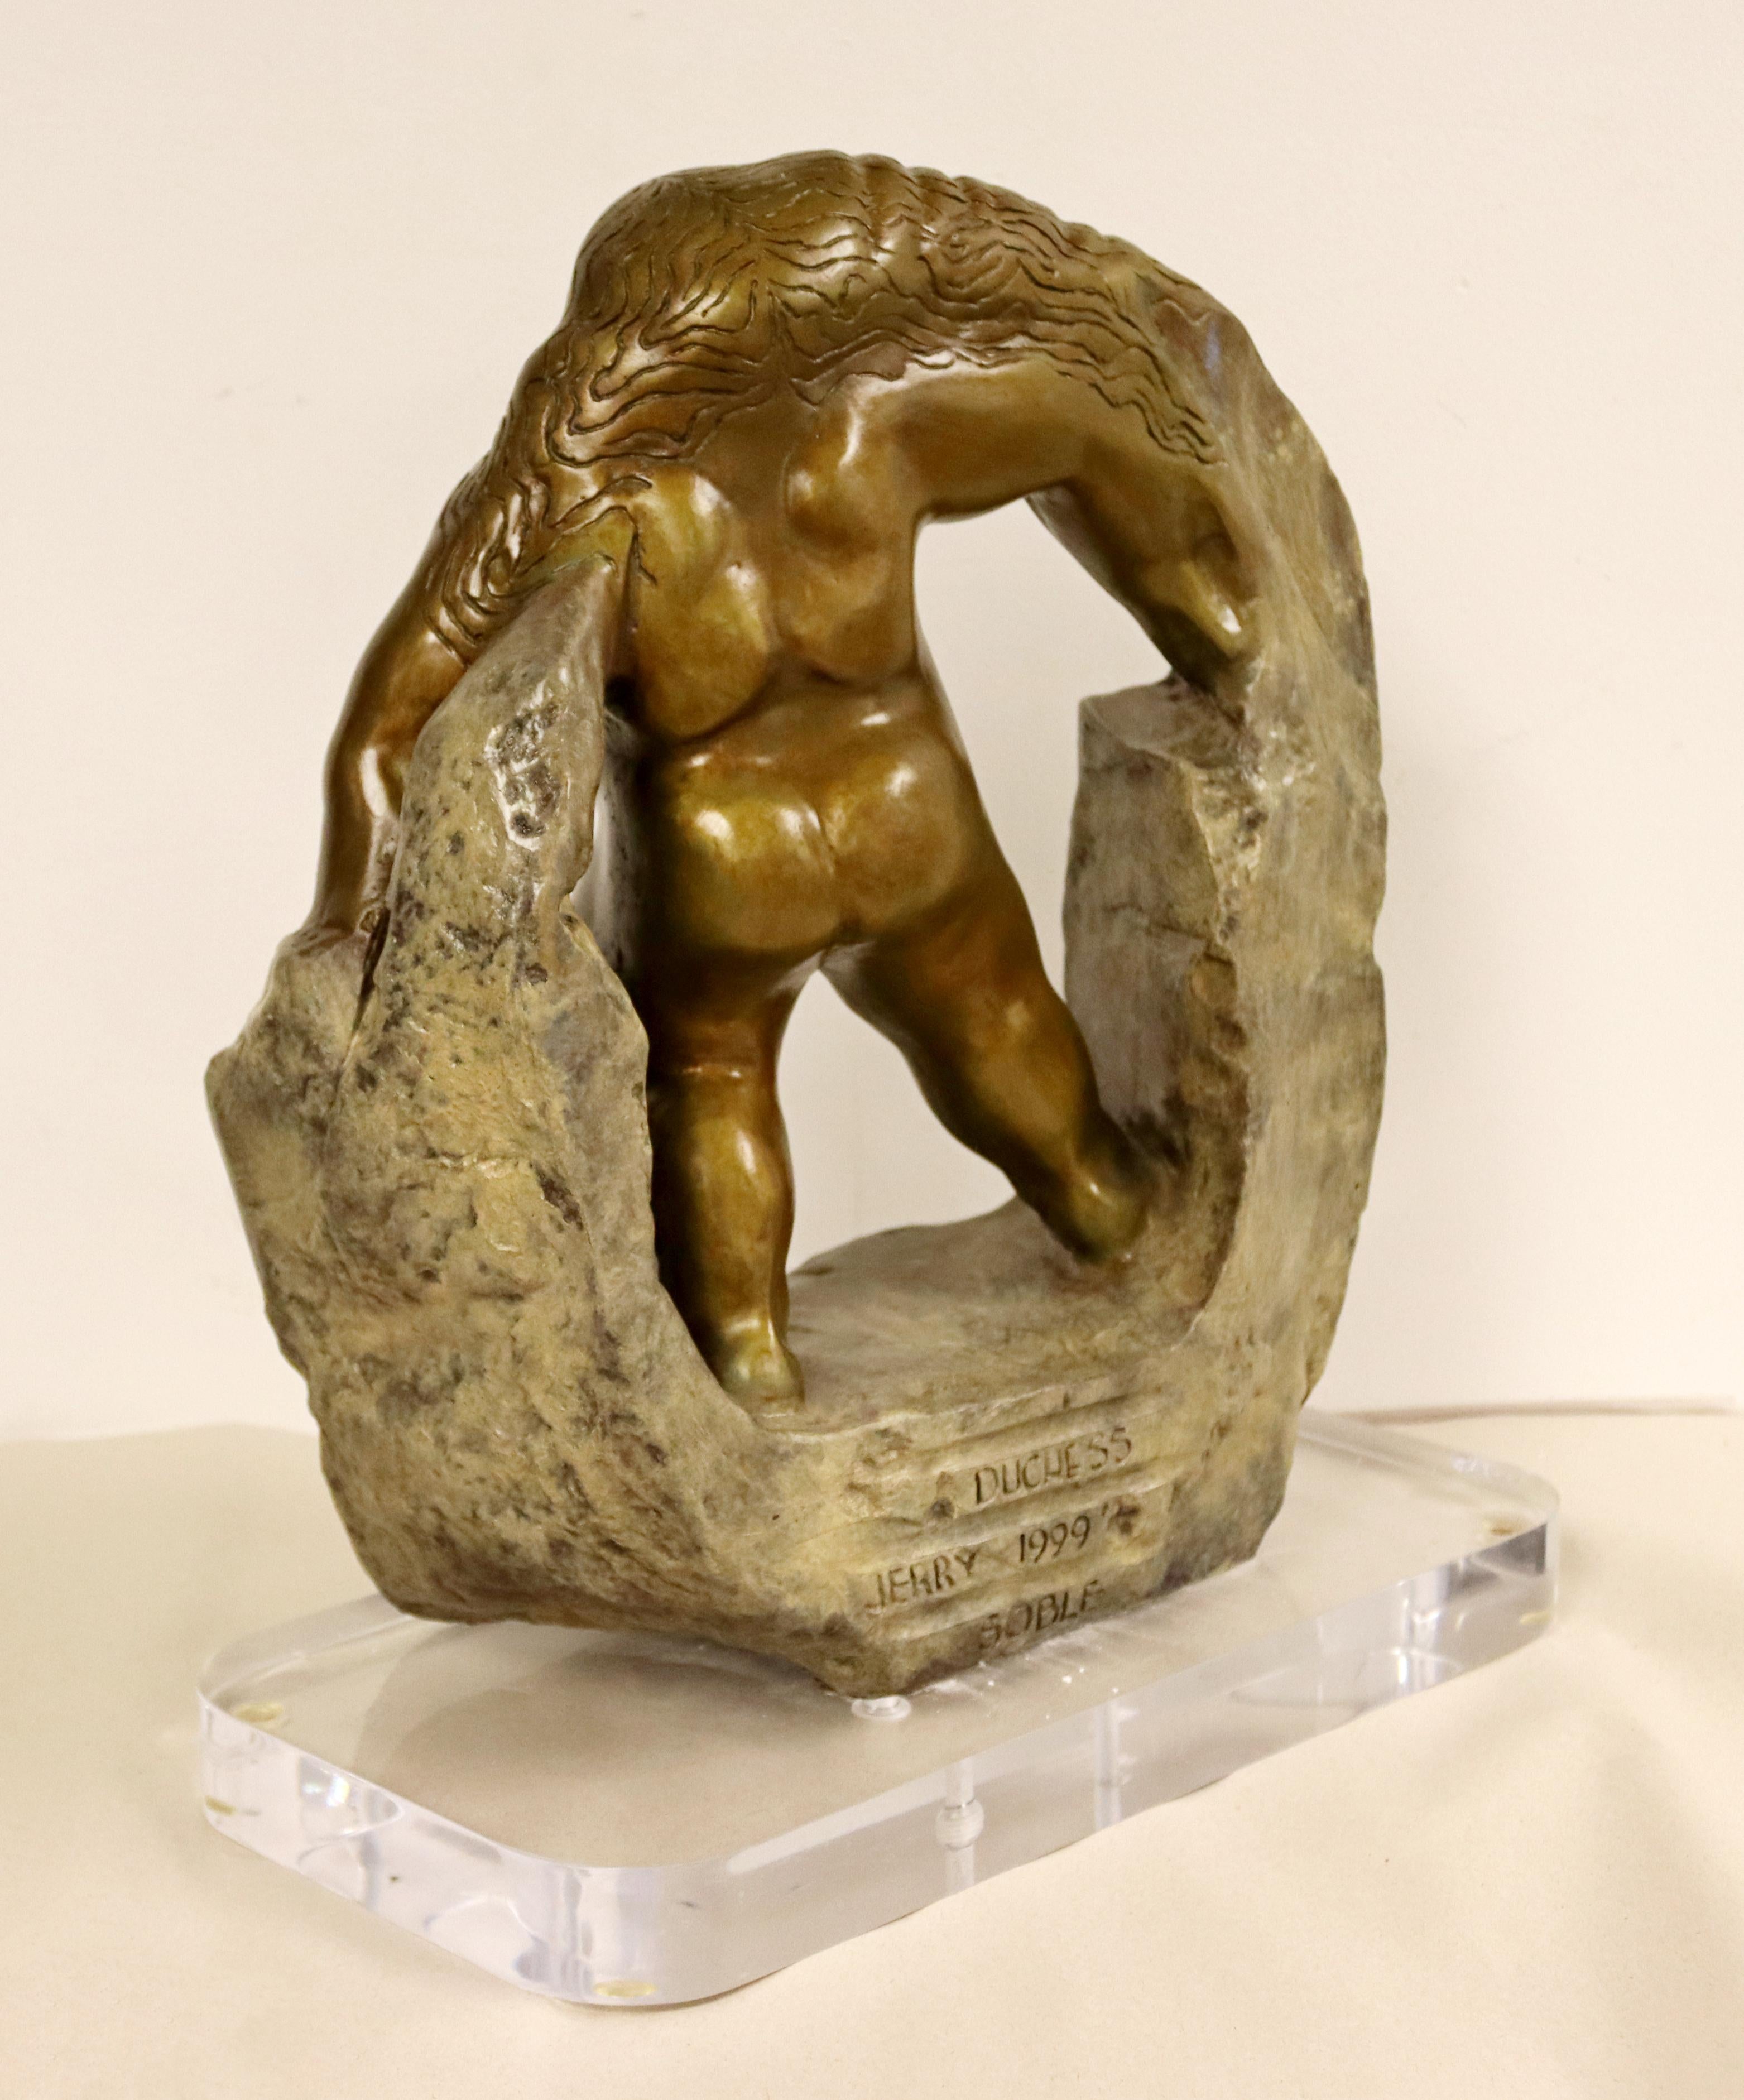 Contemporary Bronze Table Sculpture Duchess Nude Signed by Jerry Soble, 1990s For Sale 1